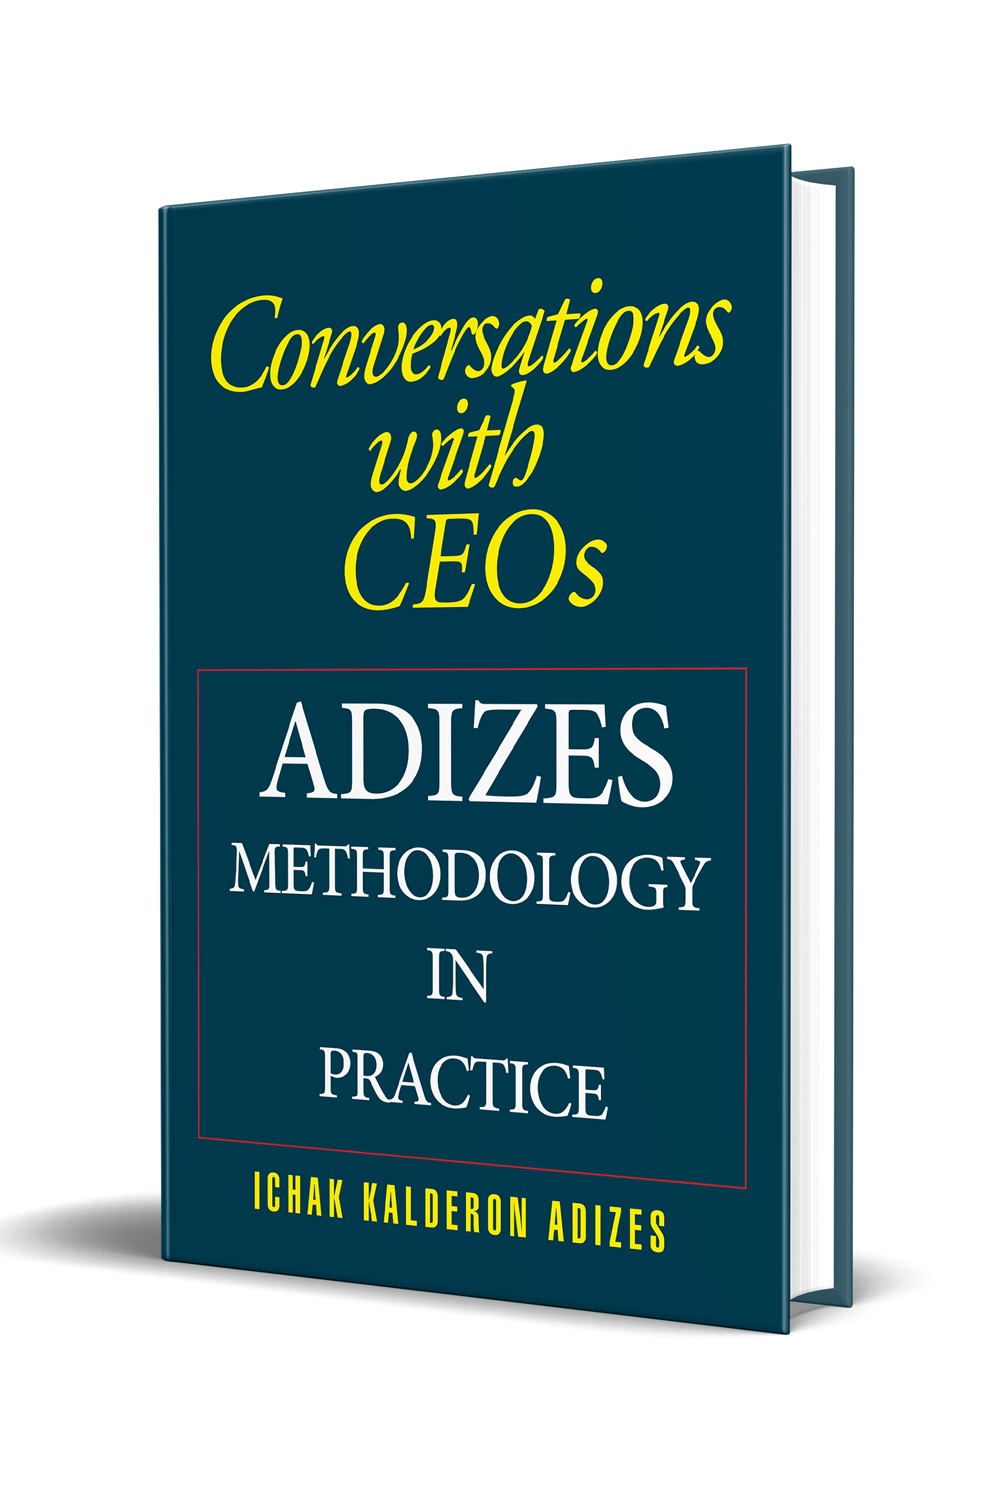 Conversations with CEOs: Adizes Methodology in Practice (English)